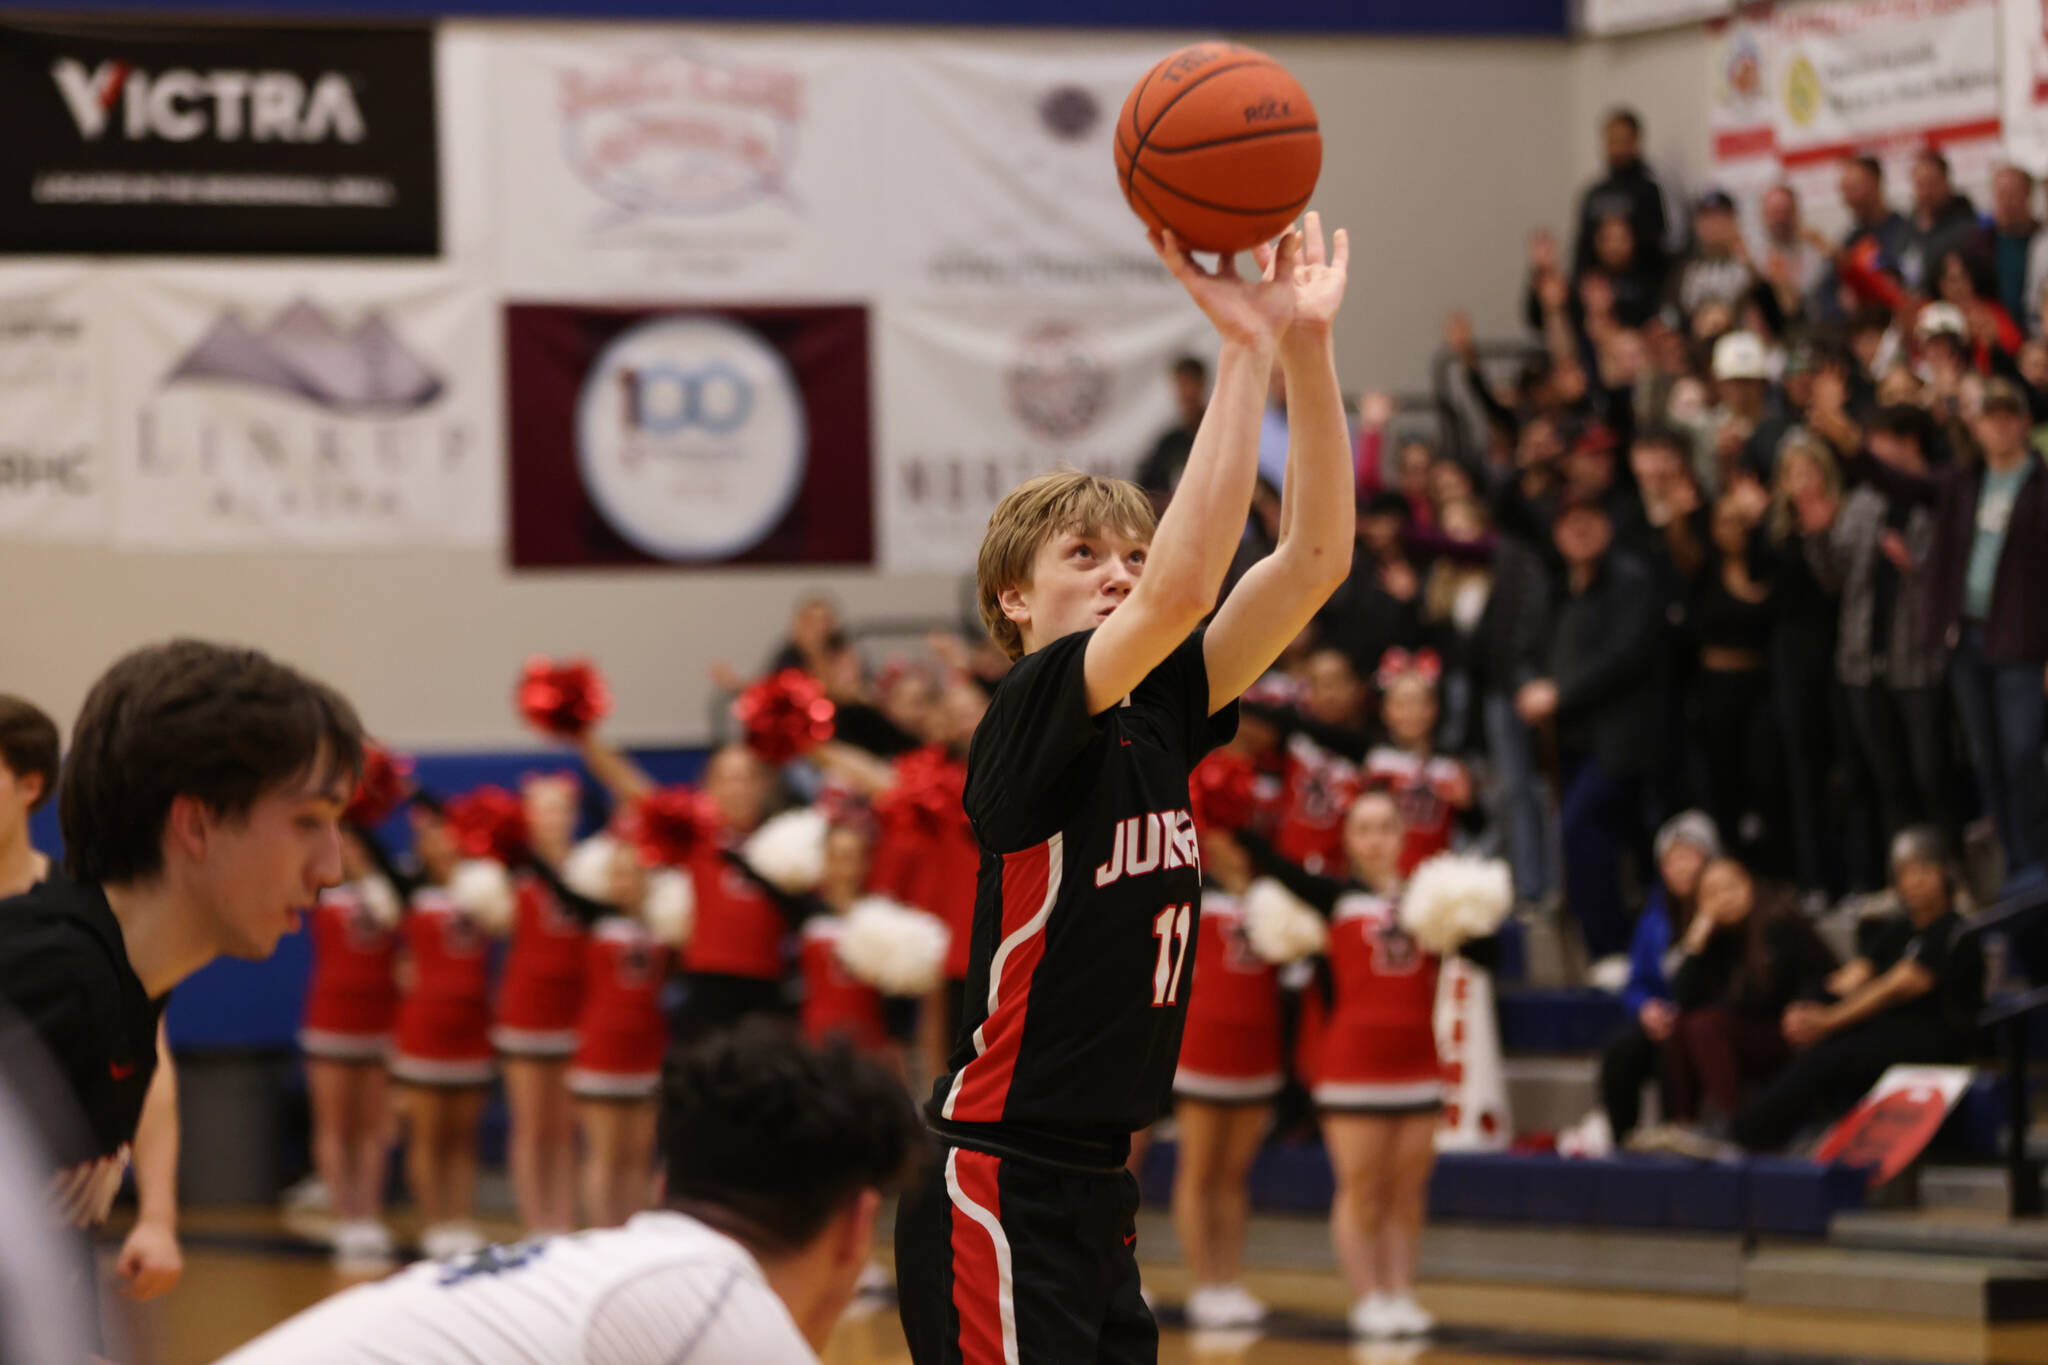 Ben Hohenstatt / Juneau Empire 
JDHS junior Sean Oliver takes a free throw during the first half of a cross-town game against TMHS on Thursday night. A red-hot fourth quarter propelled the Crimson Bears to a comeback.